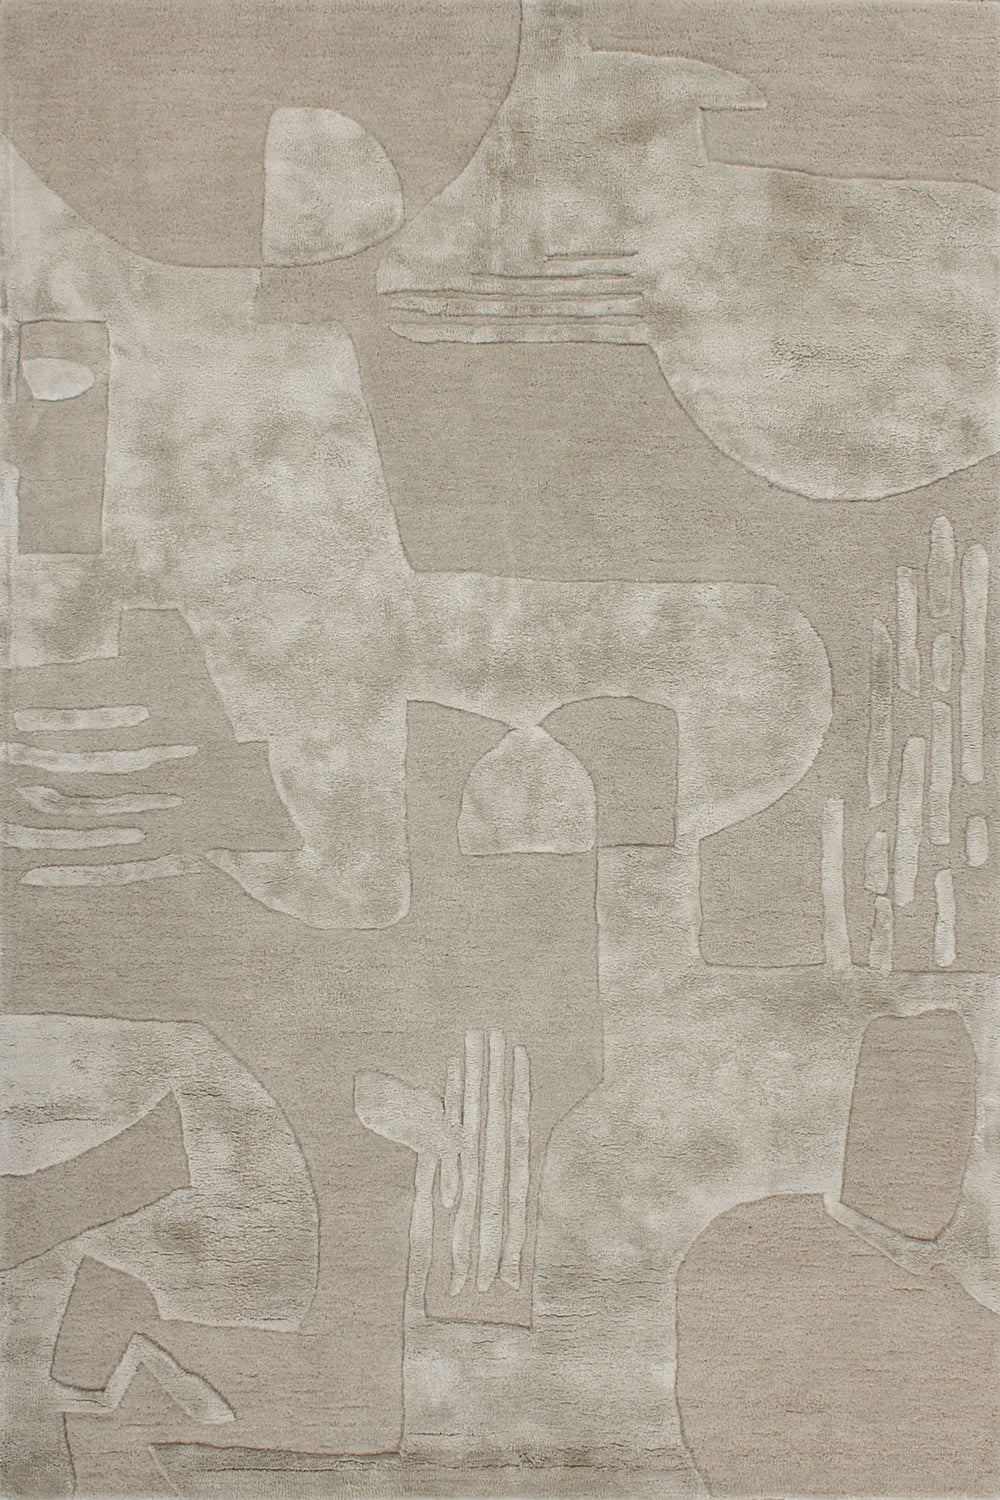 Paolo rug - pale cream with abstract high pile pattern